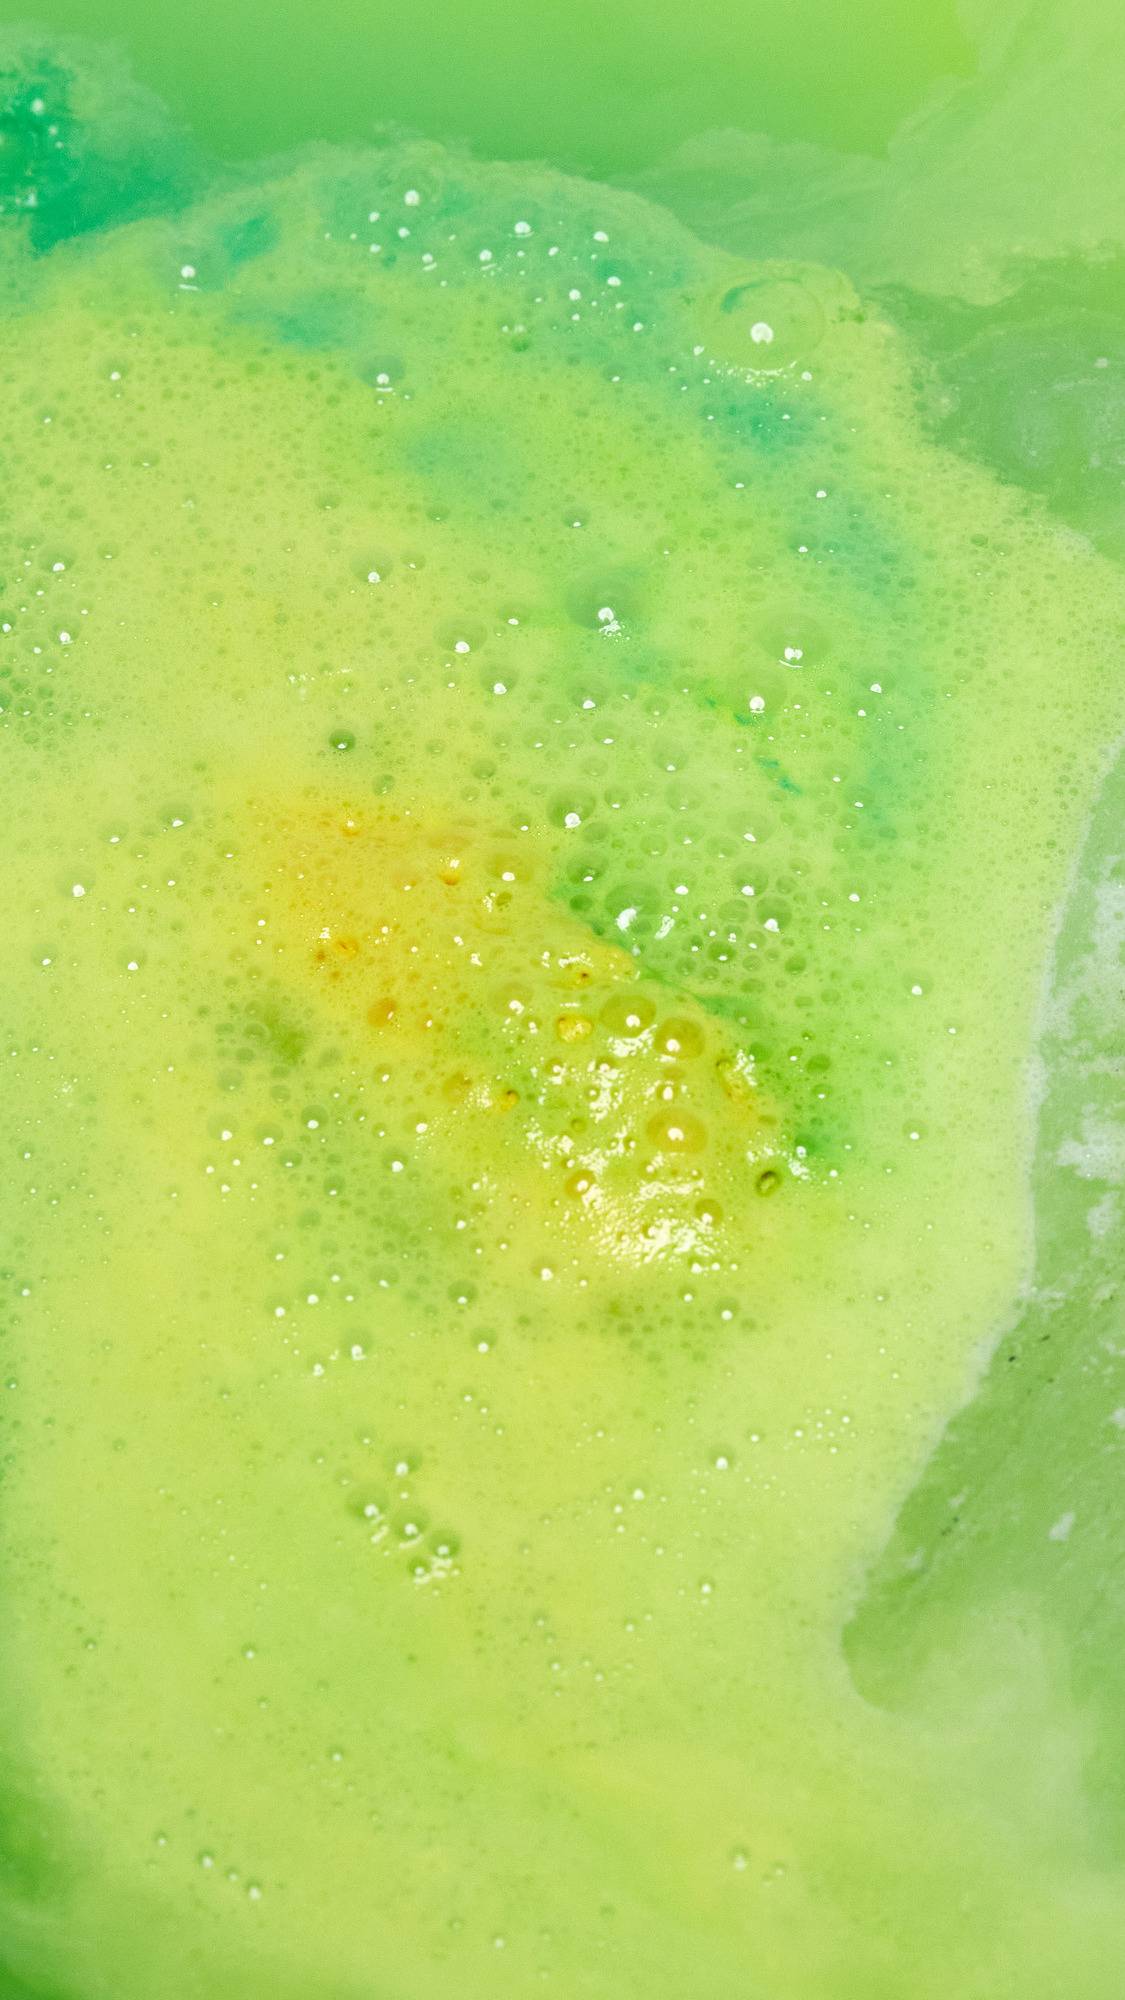 The Beat The Clock Badger bath bomb has fully dissolved leaving behind a thick blanket of lemon-lime, vibrant yellow and green foam. 